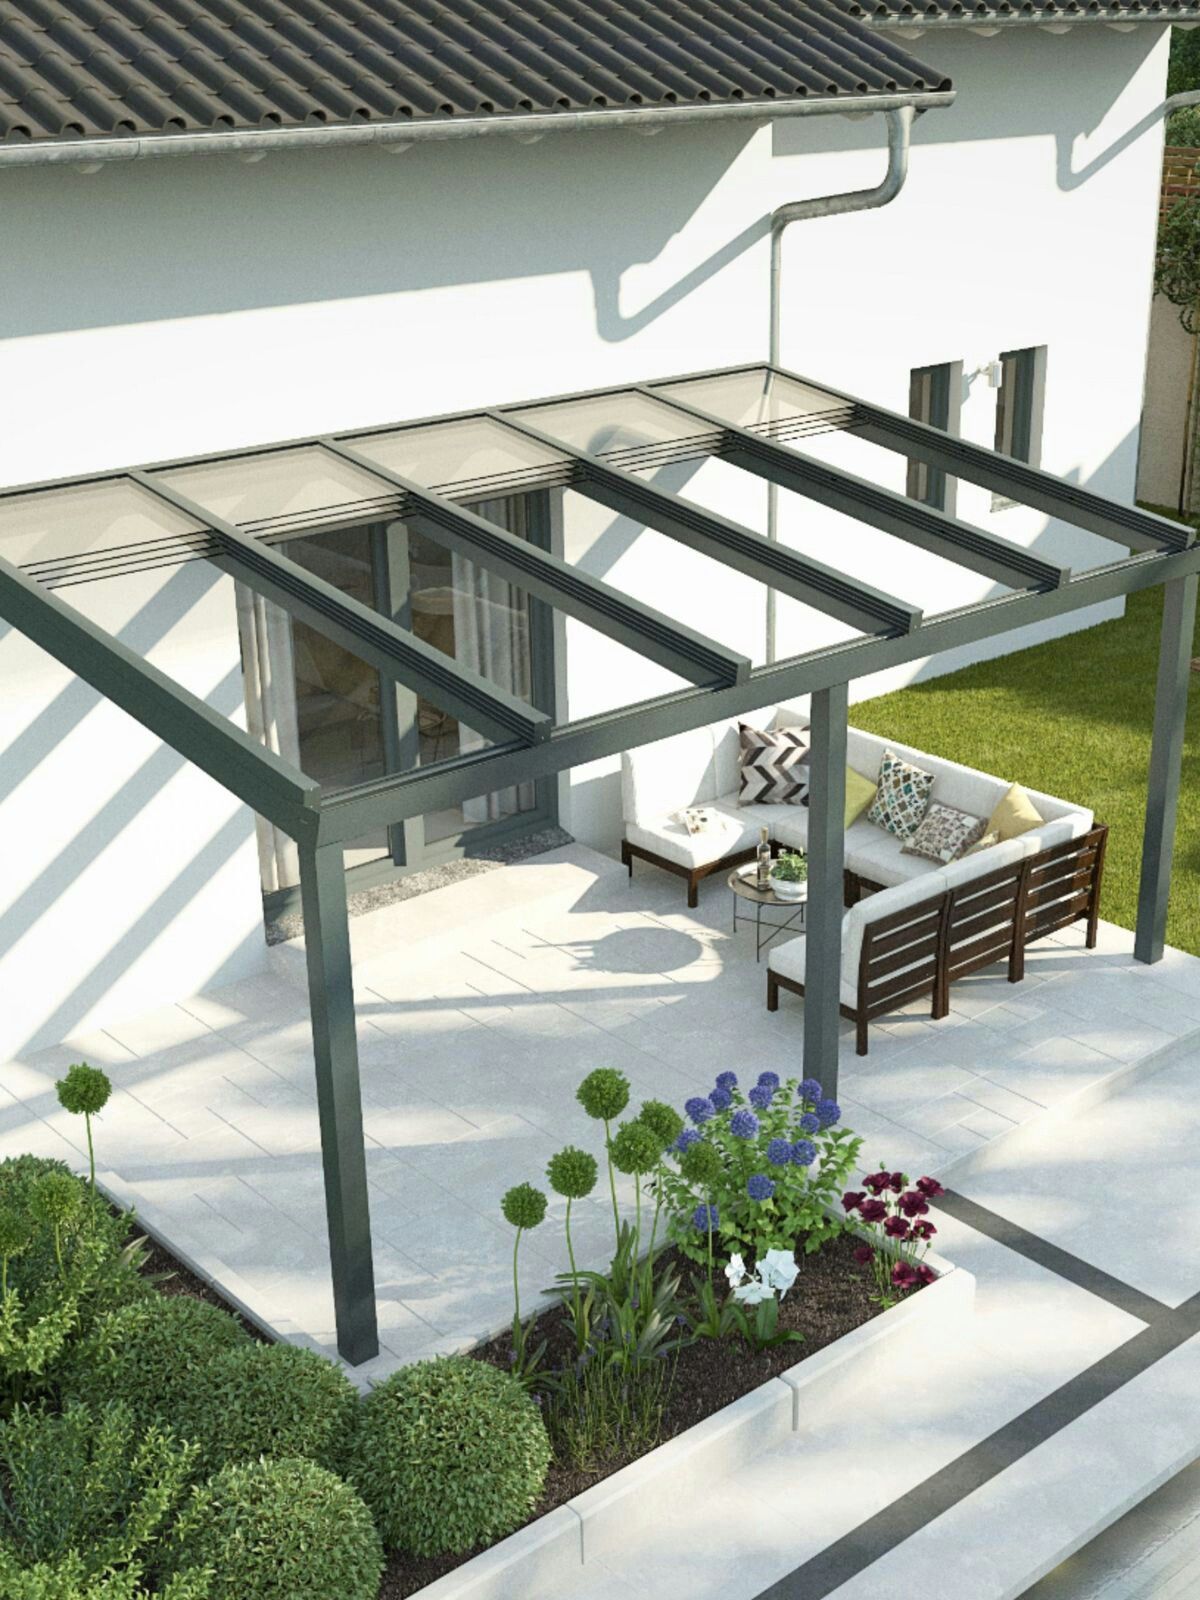 Enhance Your Outdoor Oasis with Stunning Pergola Patio Designs